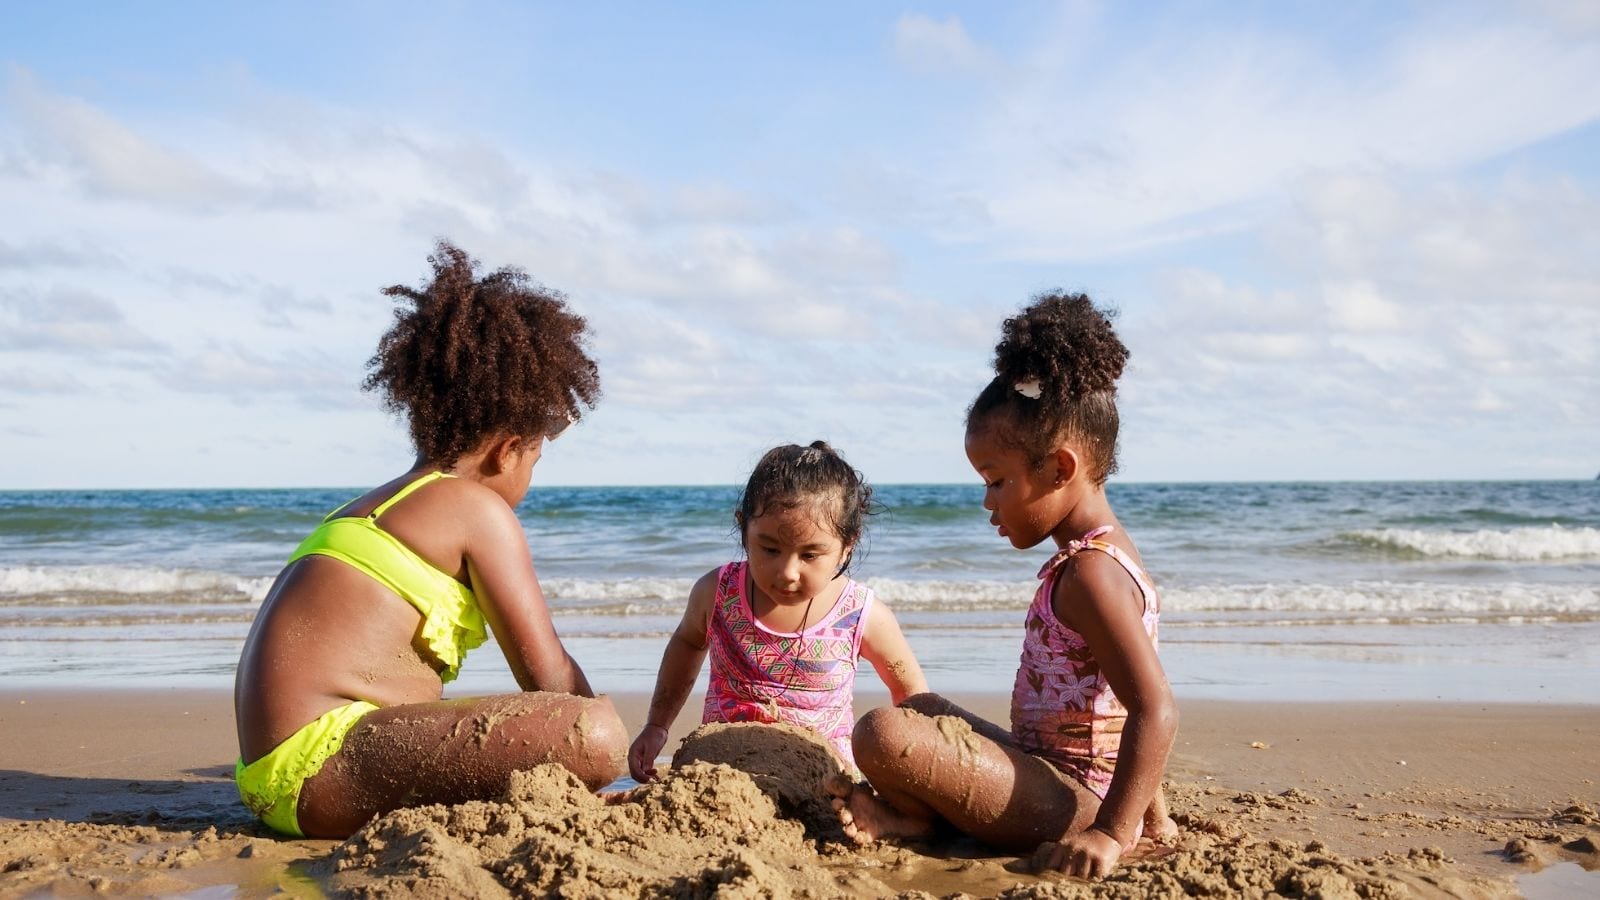 Kids building sandcastles at the beach (Photo: Chayantorn Tongmorn / Shutterstock)